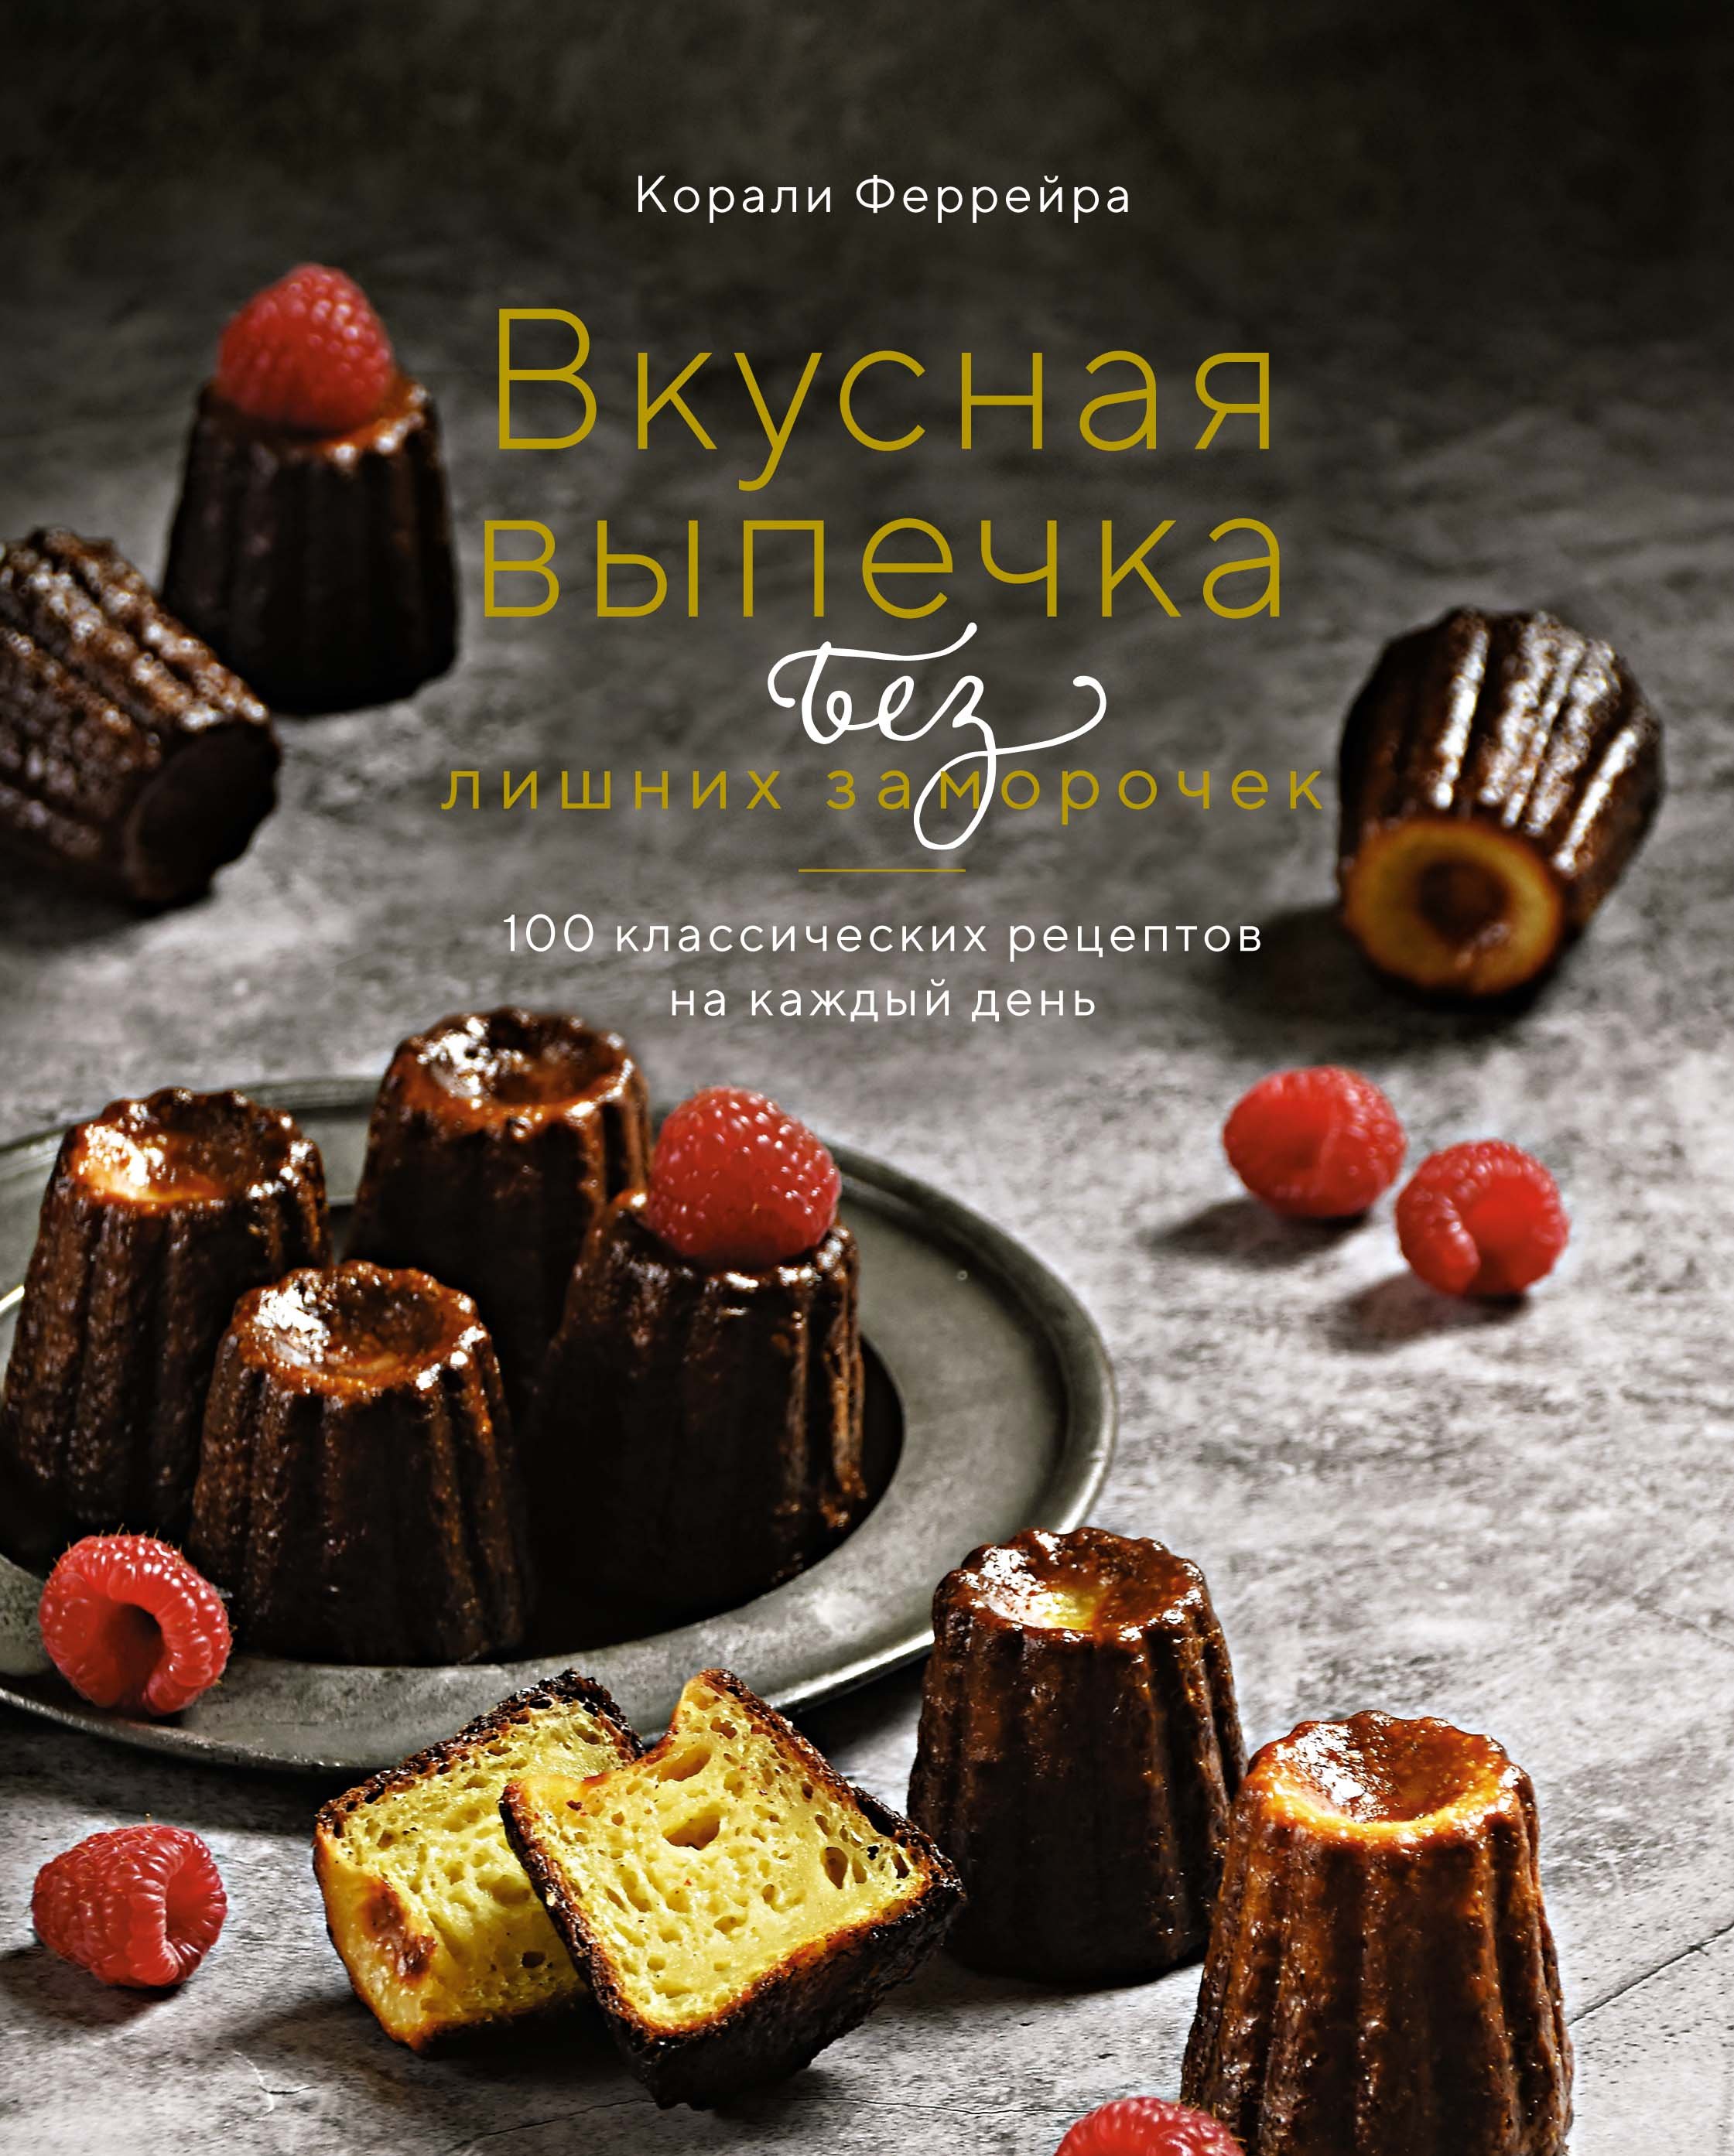 Russian Foodie Autumn 2015